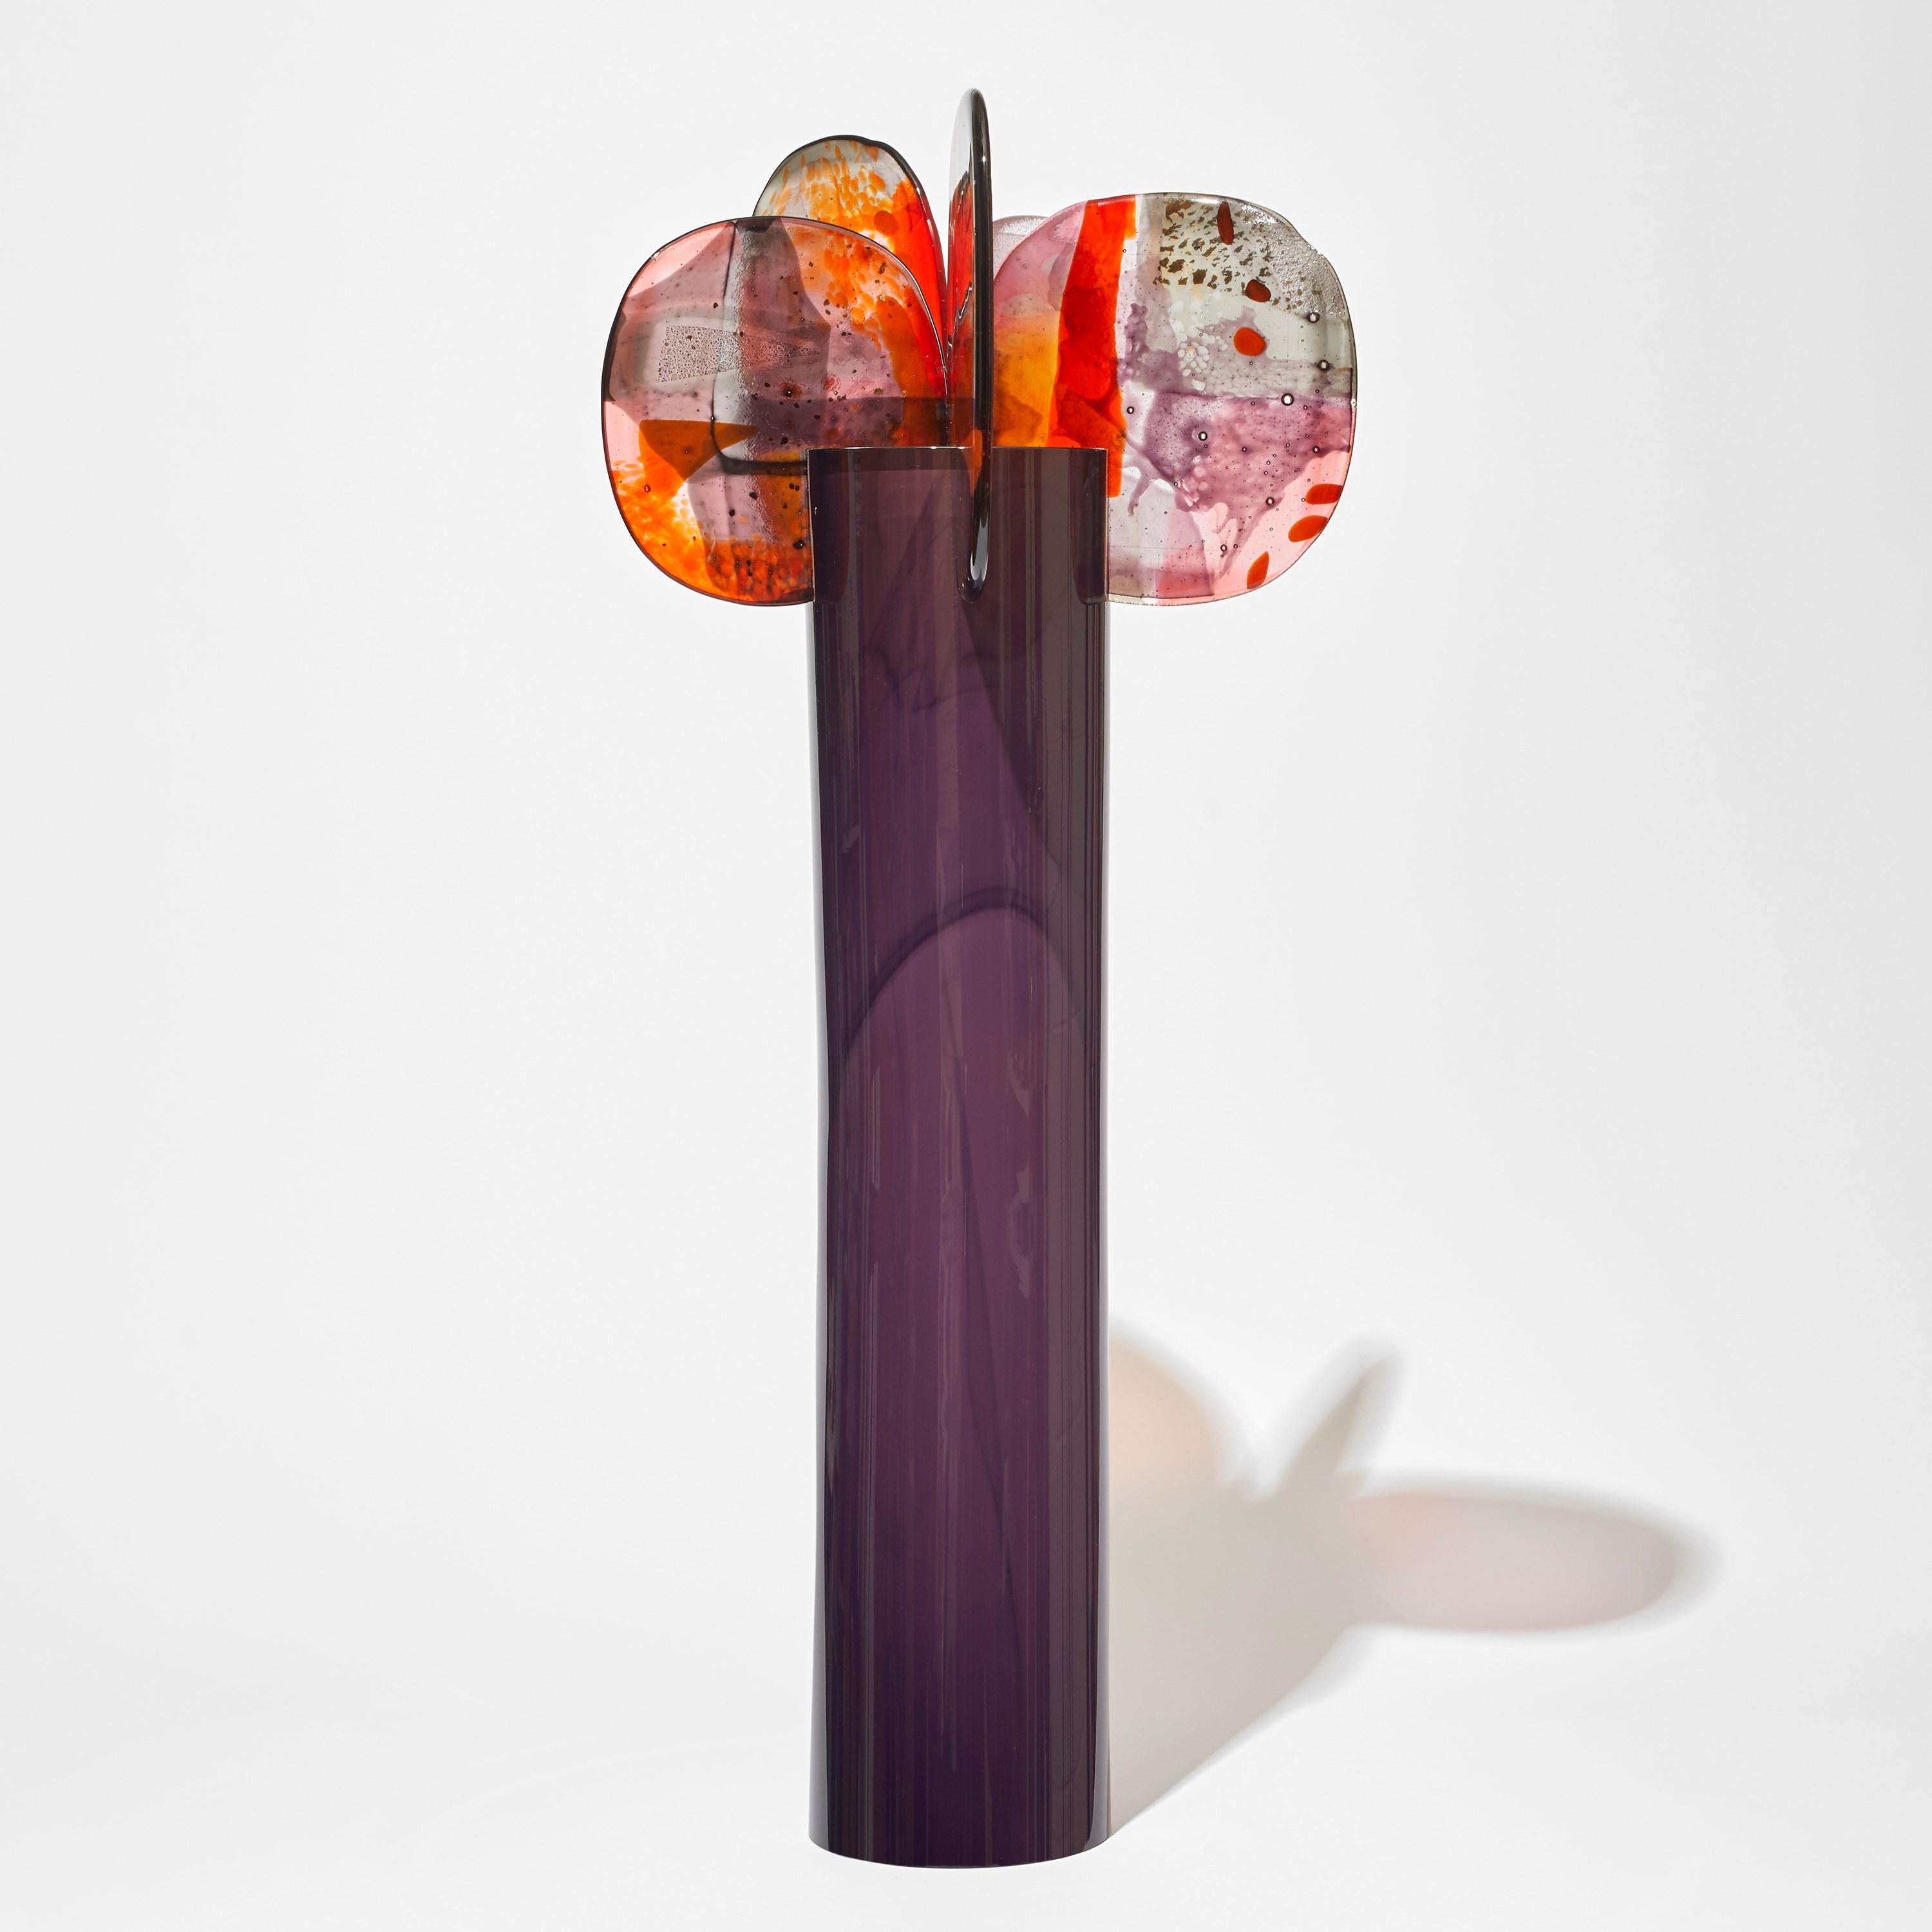 British Paradise 02 in Stapelia, purple, grey, red & gold glass sculpture by Amy Cushing For Sale